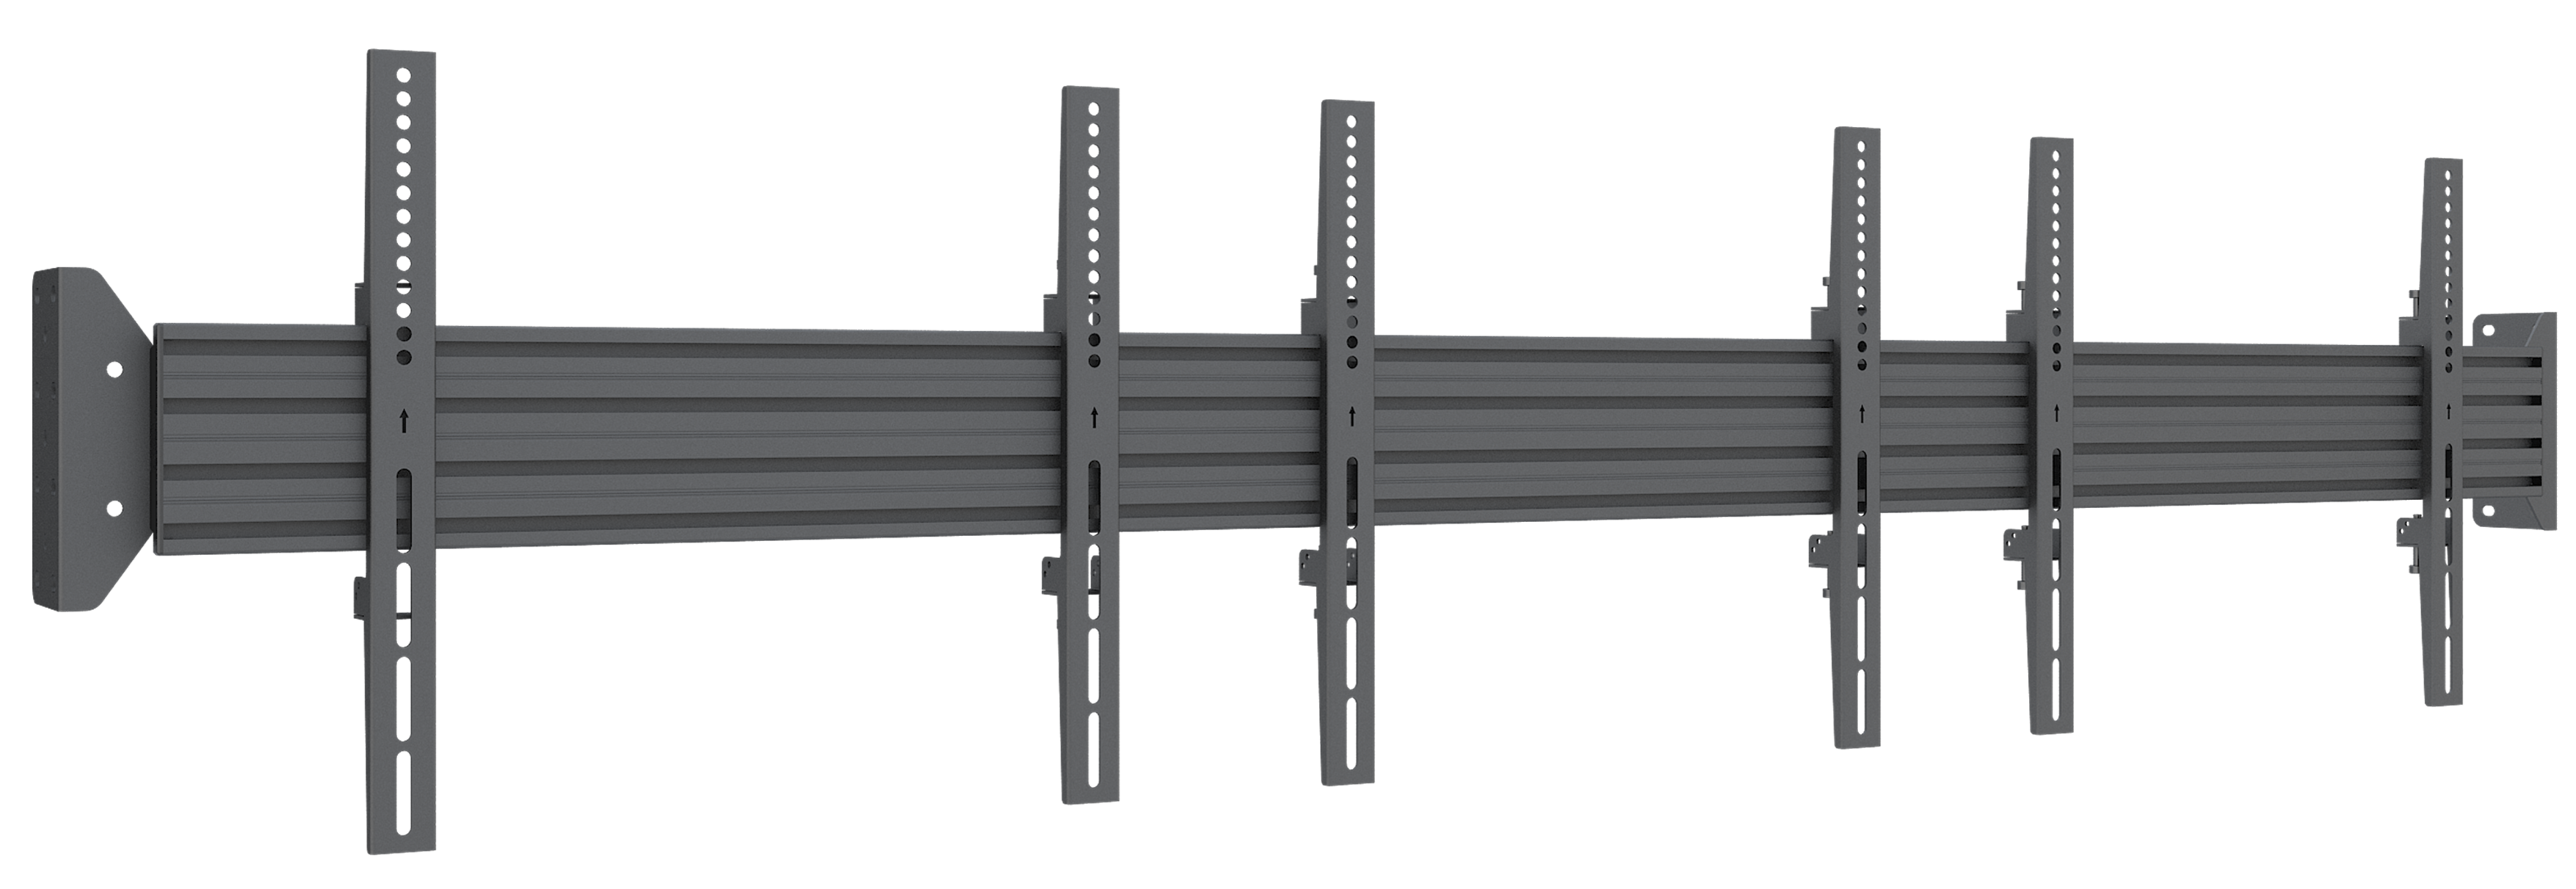 Dual-Point Three-Screen Horizontal Wall Mount (Side-by-side)